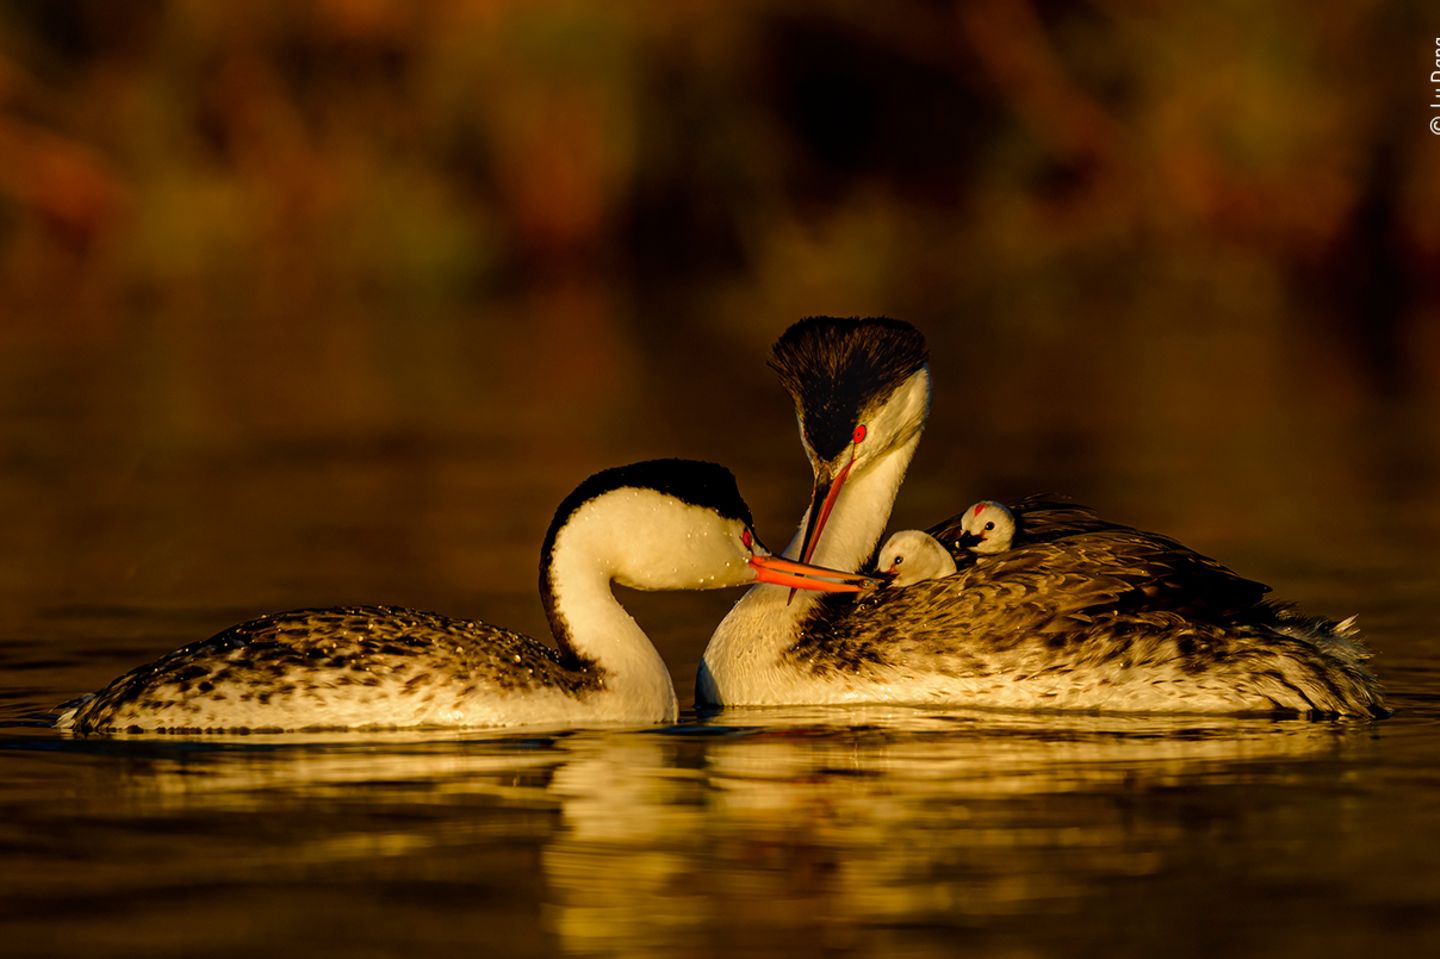 All together by Ly Dang, USA  The Clark’s grebes on Ly’s local lake in San Diego, California, USA, hadn’t nested for a few years, and he wasn’t sure if the unusually hot and dry weather they’d been experiencing was to blame. Then in 2017 California had twice its normal annual rainfall. With the lakes full, the grebes started to build nests and lay eggs again. They build floating nests at the edge of shallow water among the reeds or rushes. The chicks hitch a cosy ride on a parent’s back soon after hatching. This picture was taken a few days after a storm which sadly washed away almost all of the grebes nests. Ly had been out on a boat for hours, scanning the surface, looking for grebes and, just as the light was fading, he spotted them, the survivors. Nikon D500 + 600mm f4 lens + 1.4x teleconverter; 1/2000 sec at f5.6; ISO 450; handheld on a small boat.